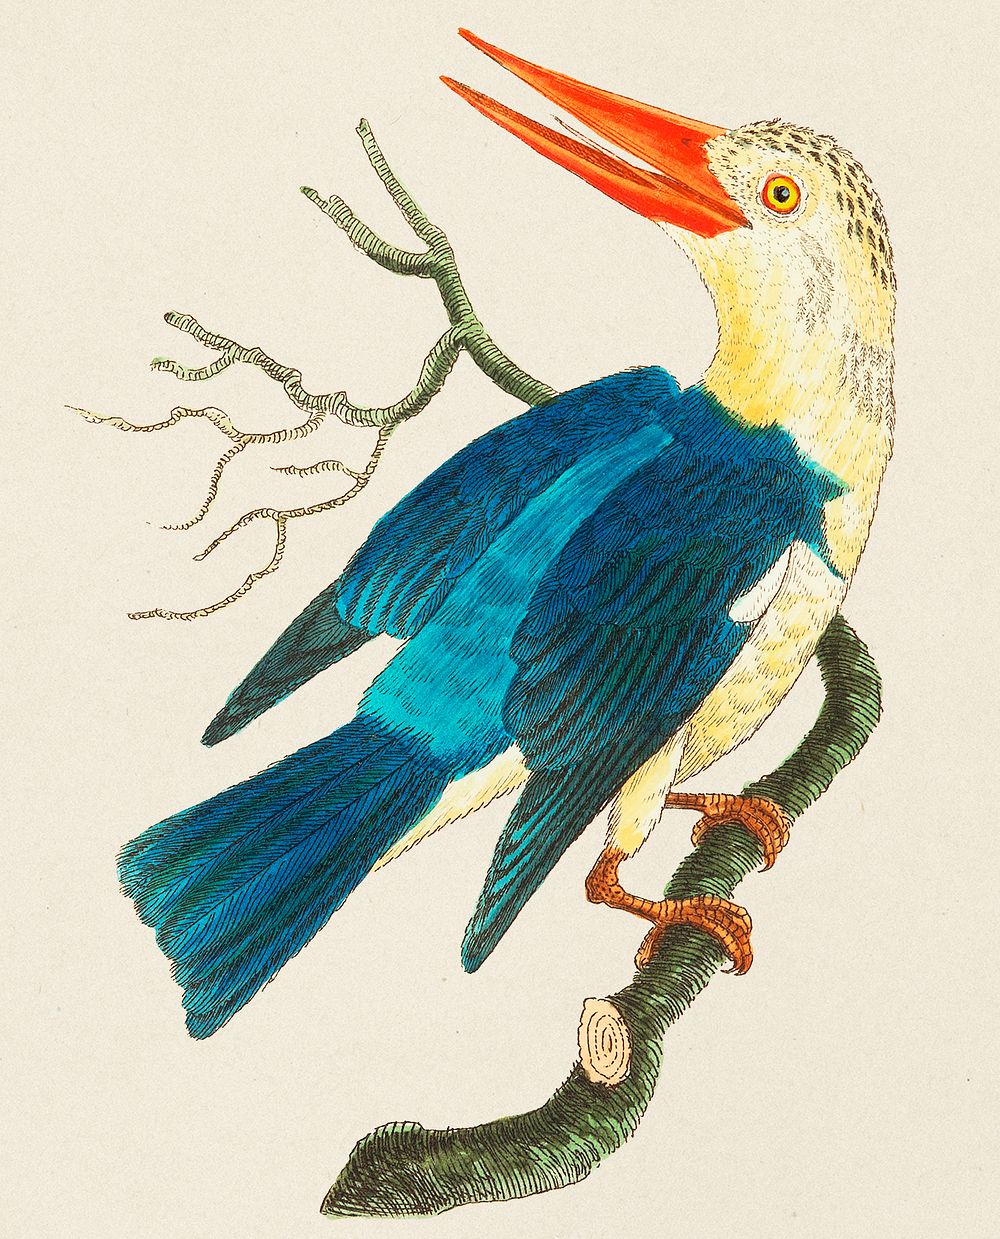 Vintage Illustration of White-headed Kingfisher or Blue-green Kingfisher